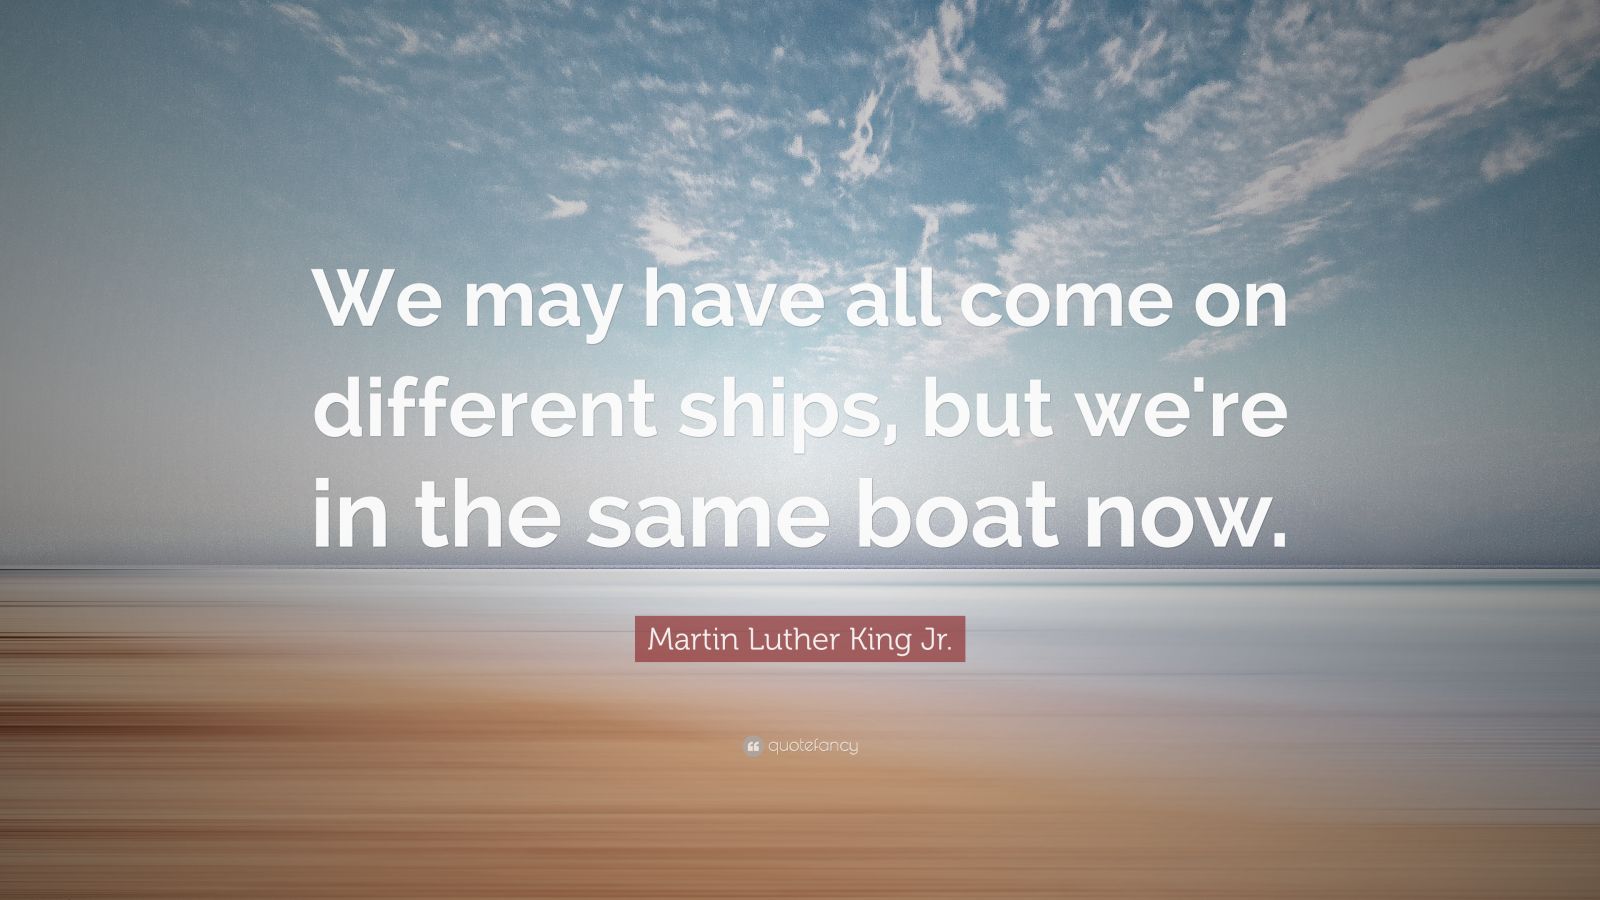 Martin Luther King Jr. Quote: “We may have all come on different ships, but we're in ...